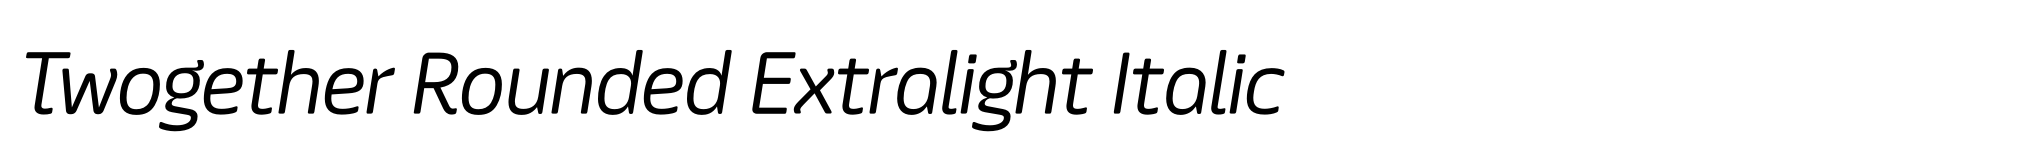 Twogether Rounded Extralight Italic image